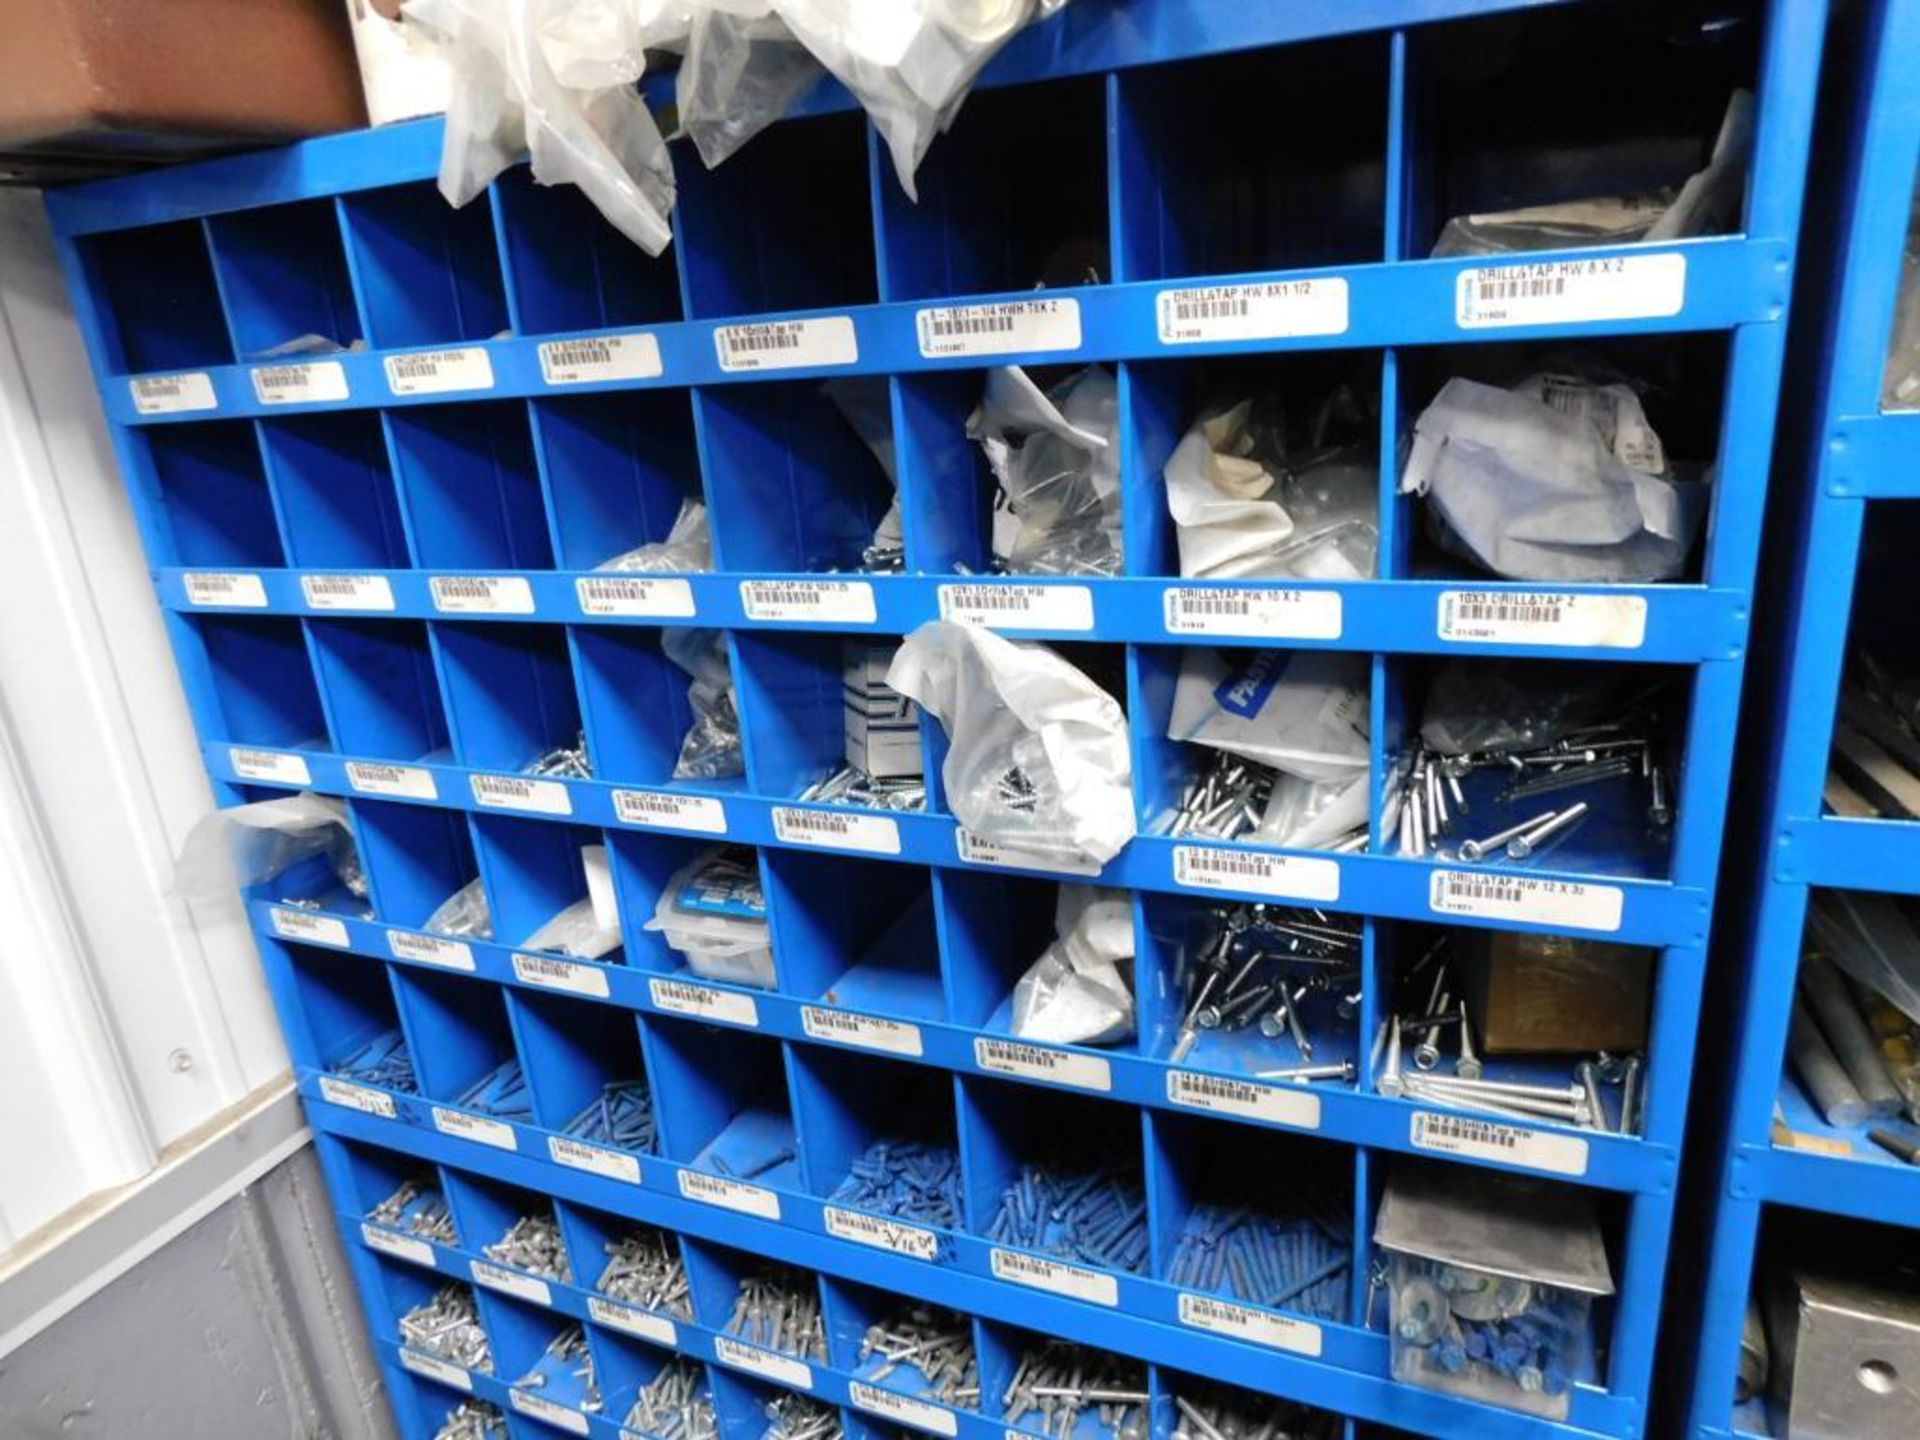 LOT: (7) Sections Fastenal Compartment Organizers w/Contents of Hardware, Plumbing, etc. - Image 13 of 15